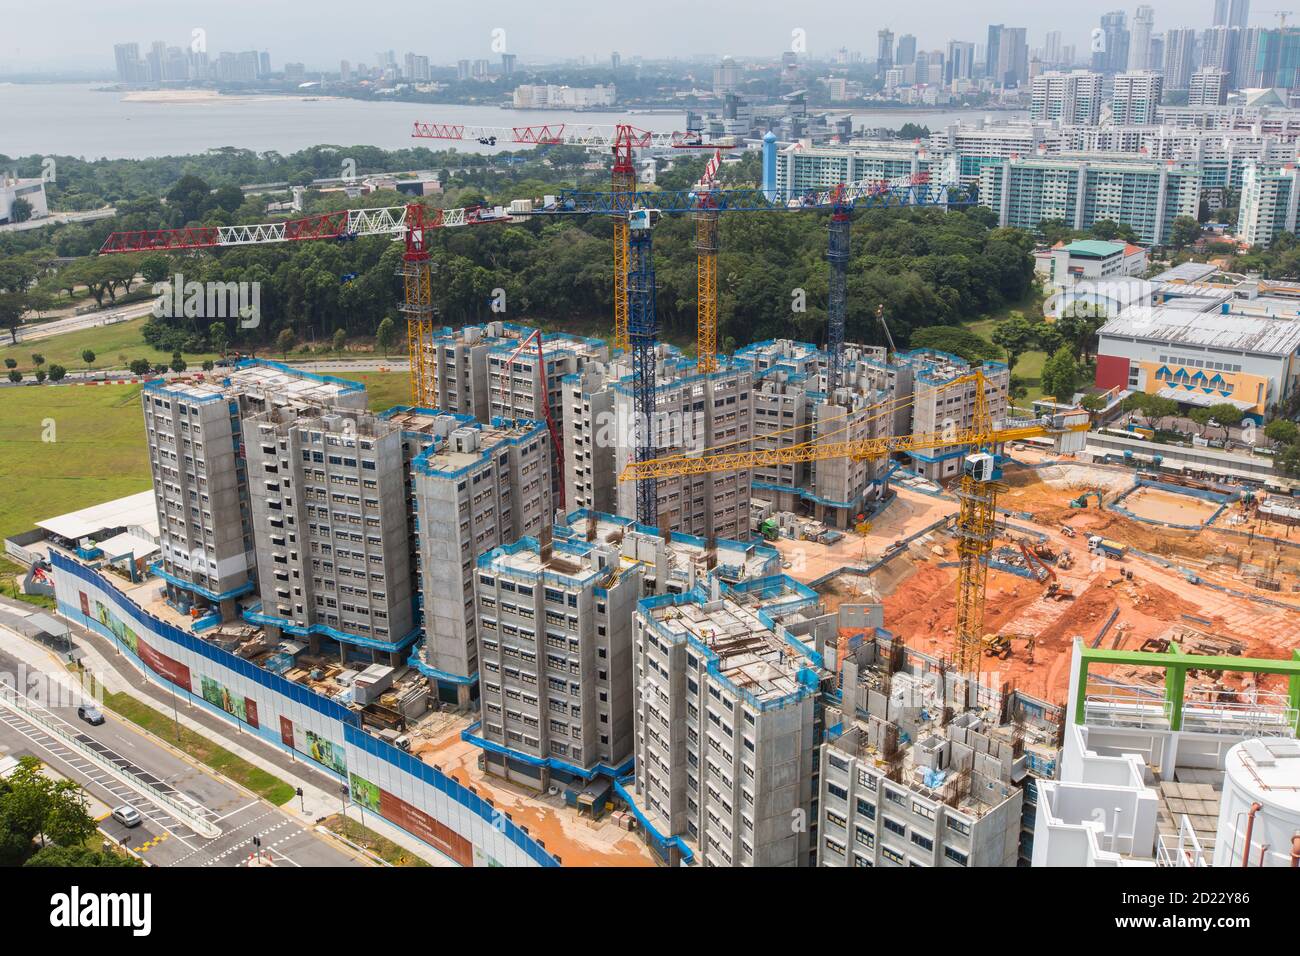 New housing estates building in progress as contruction been delay due to the Covid-19 pandemic, Singapore. Stock Photo